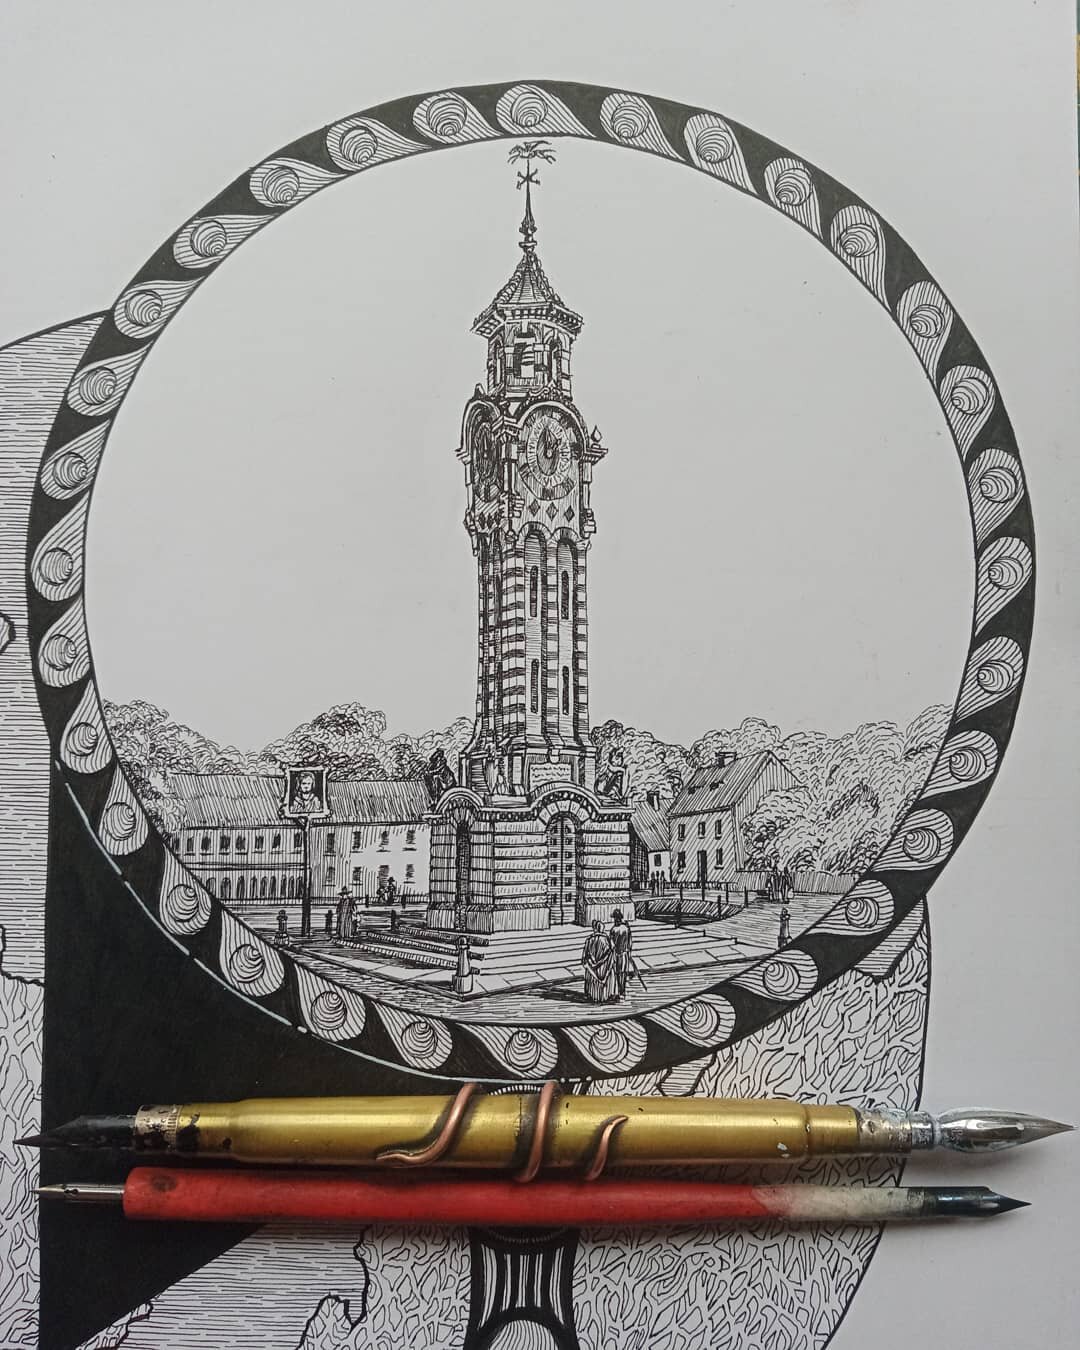 Illustration commissioned by @yesyaz_  pic 3of4 ✨✨✨🐍✨✨✨🌞 #illustration #drawing #dippen #ink #victorian #epsom #clock #clocktower #map #design #vintage #monotone #blackandwhite #bristolboard #indianink #bradrobertbenford #the_serpent_pen